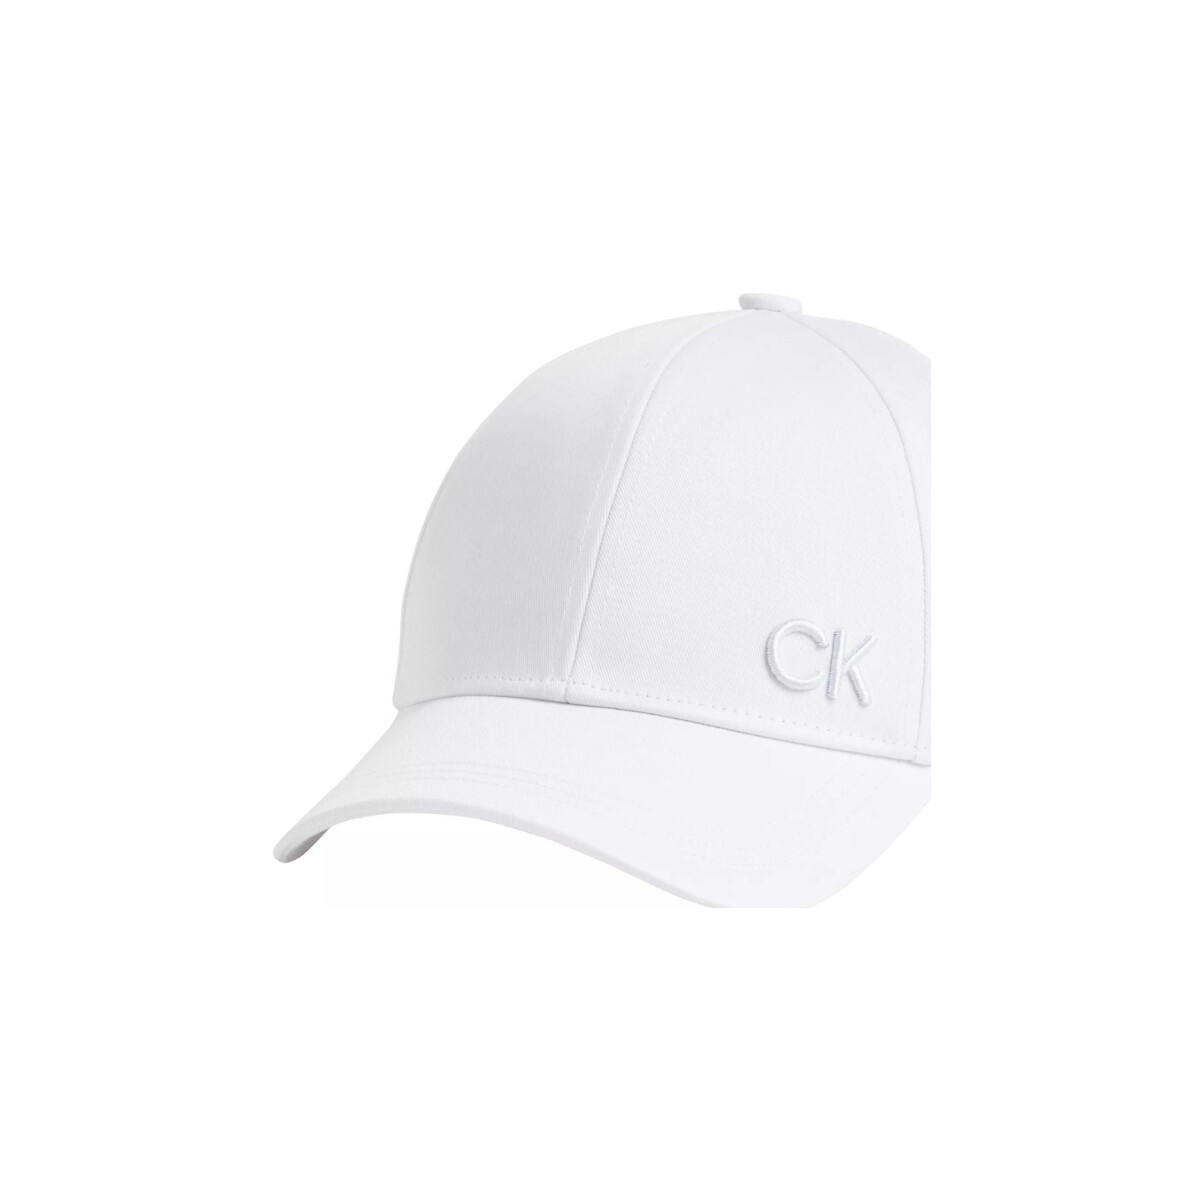 Accessoires textile Homme Casquettes Okulary Calvin Klein Antal Gympen in wit Casquette homme  Ref 62423 YAF Blanc Blanc